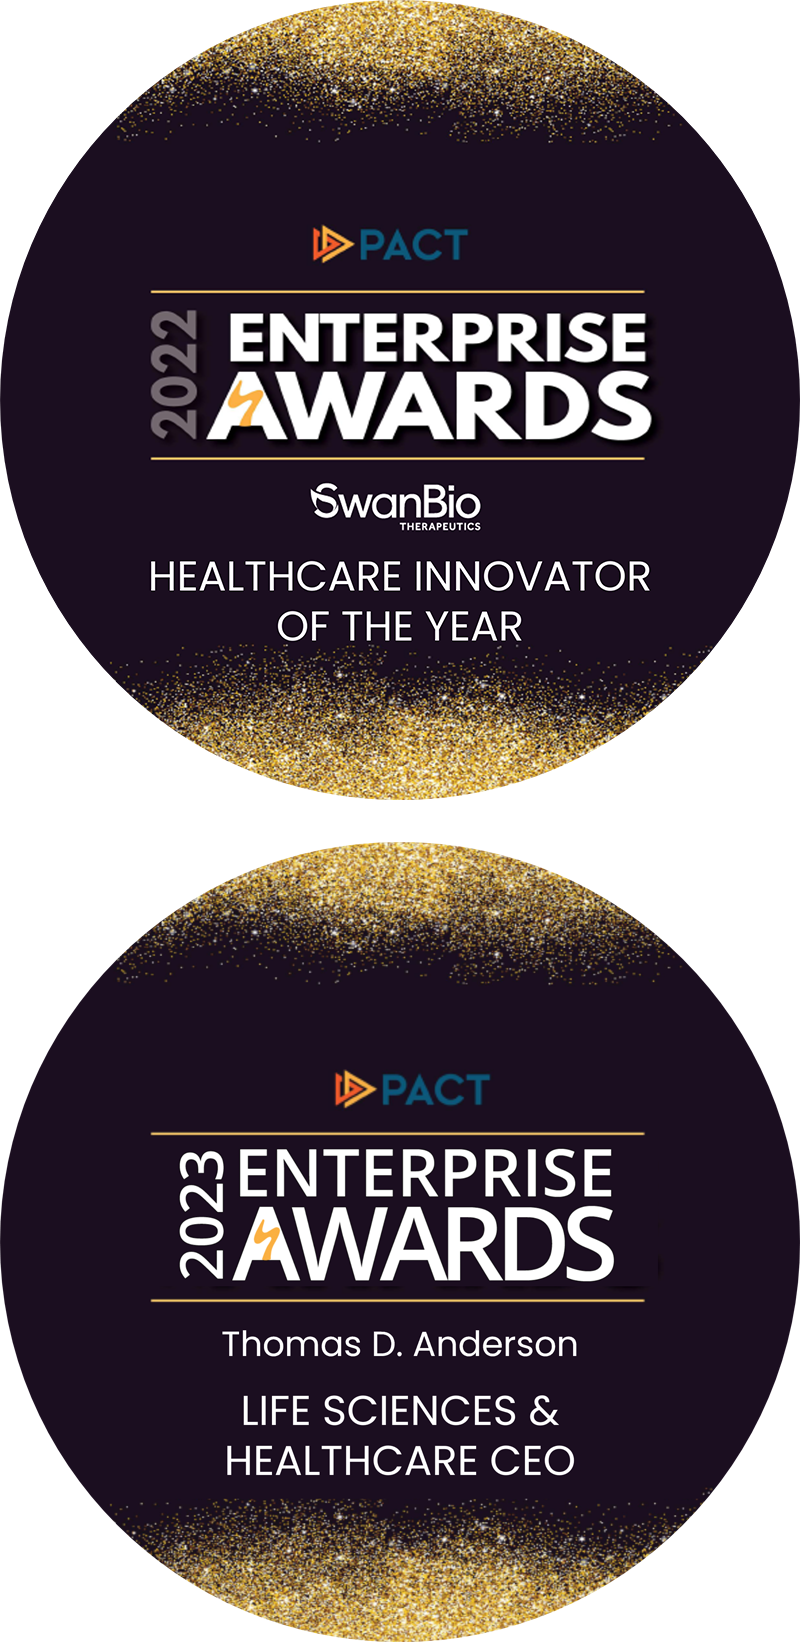 PACT Enterprise Awards 2022 and 2023